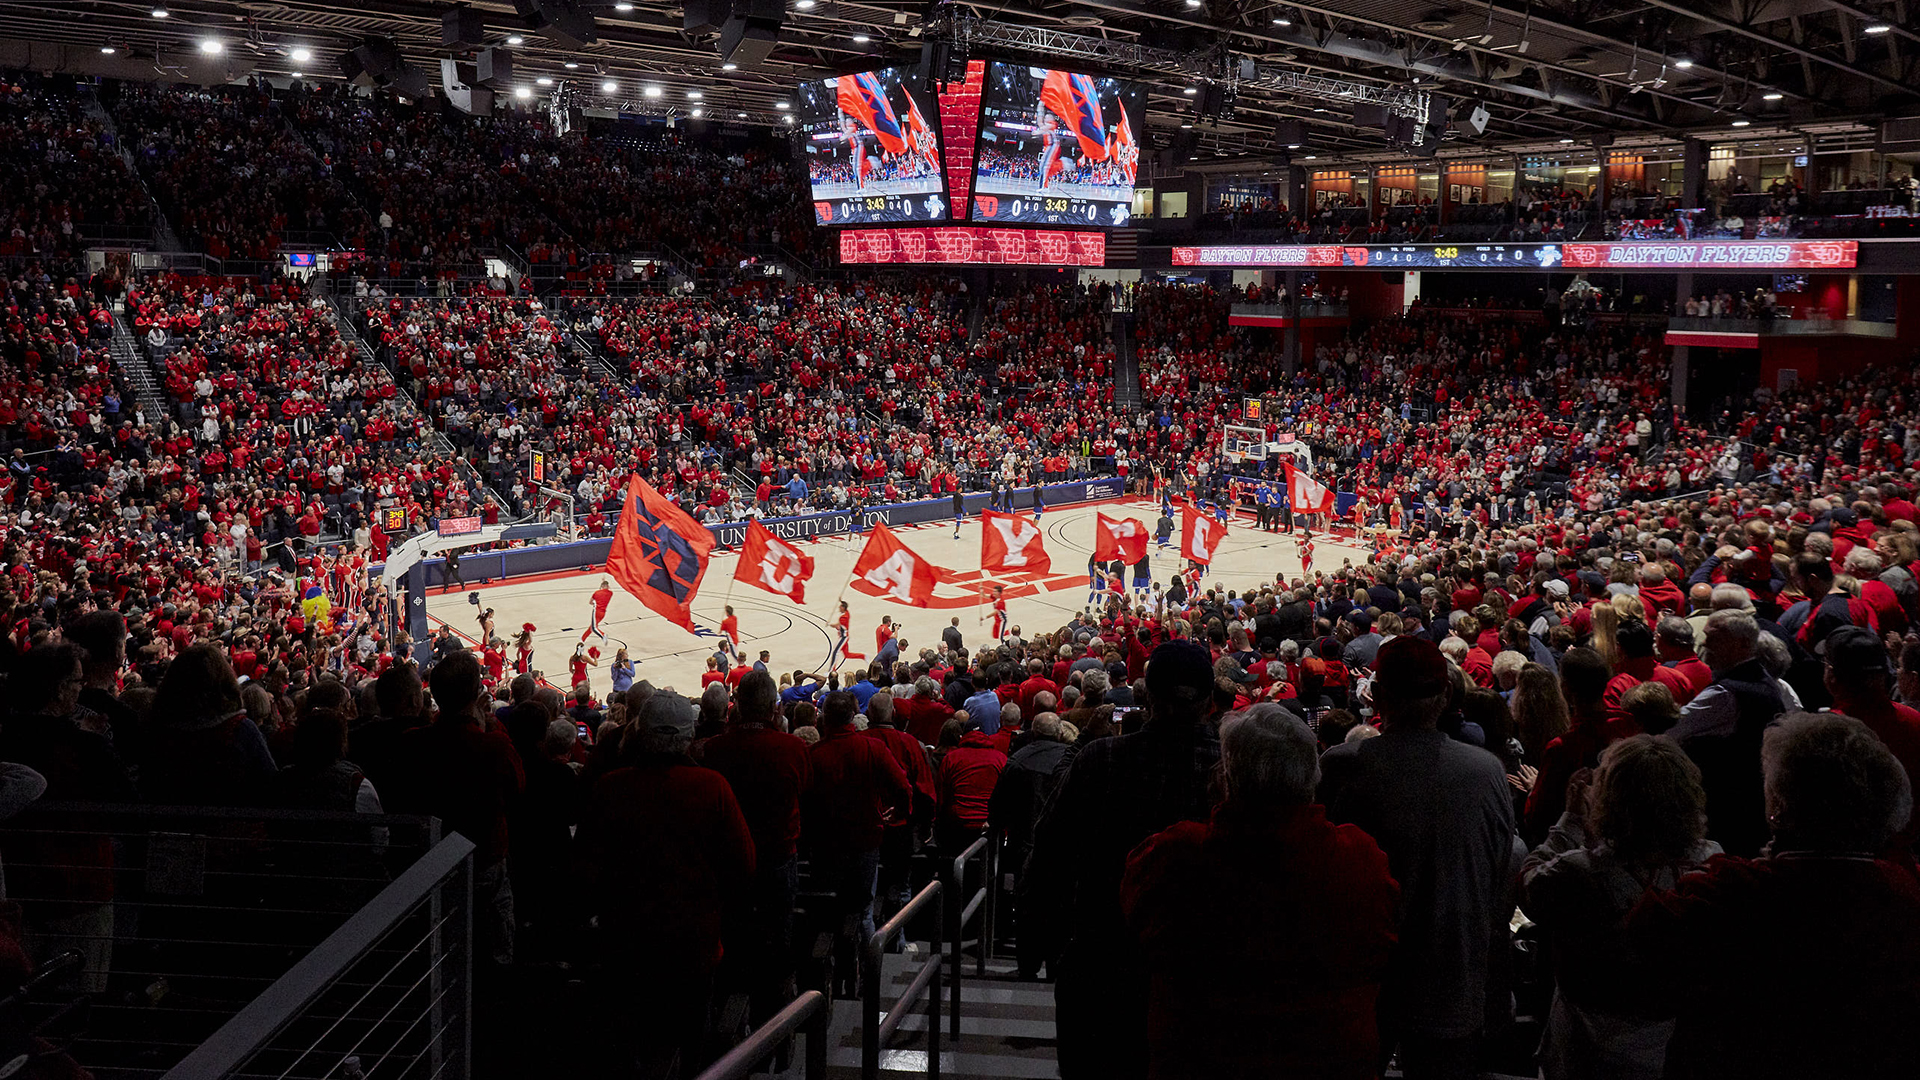 University of Dayton to show your Flyer pride while working, teaching or learning from home? Visit our digital gallery to find campus image to use for your Zoom background